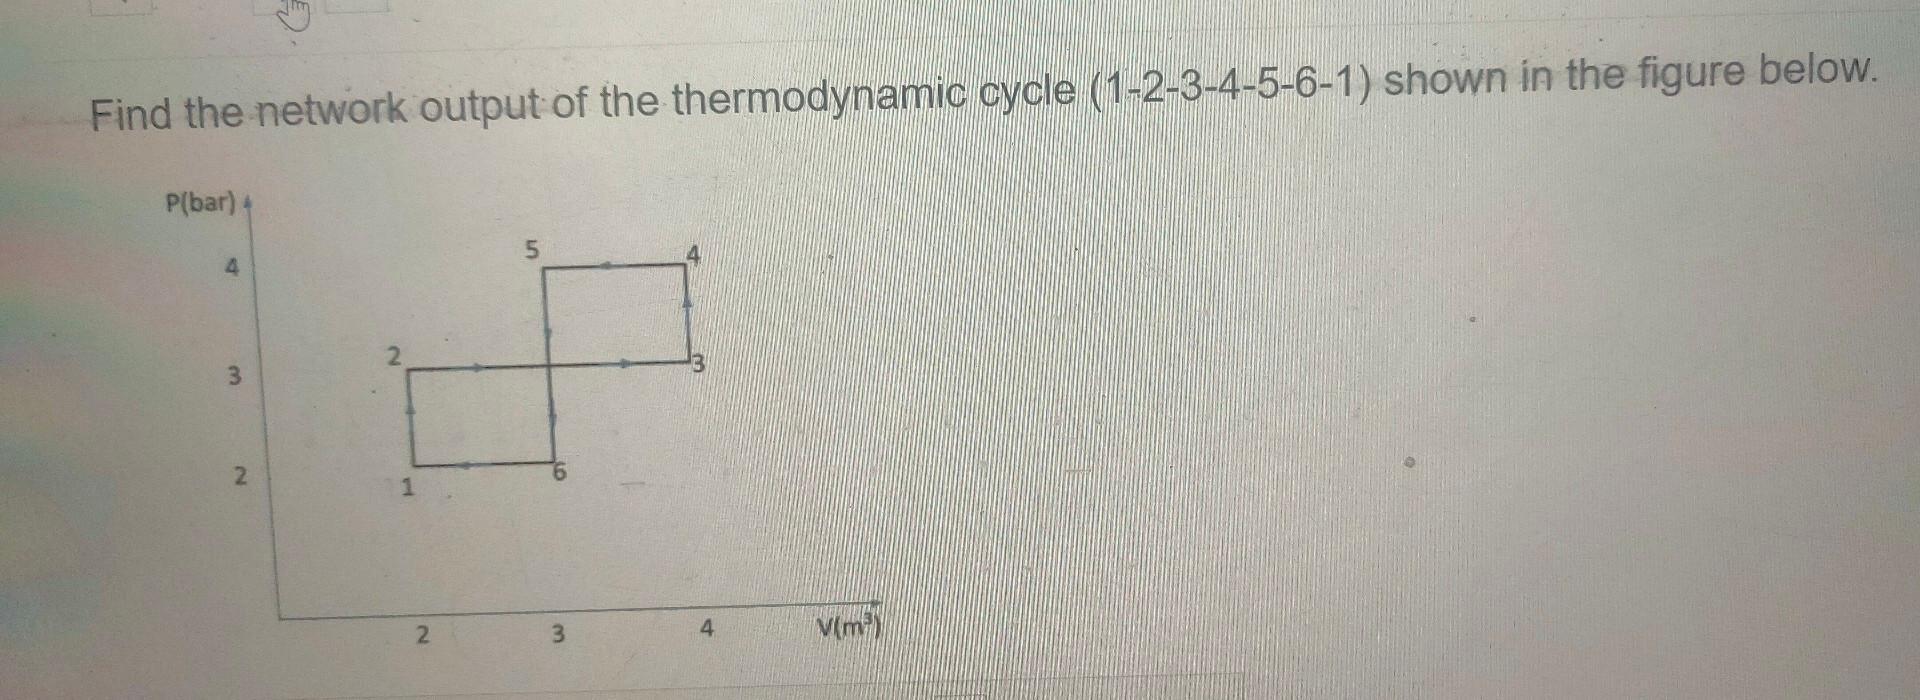 Find the network output of the thermodynamic cycle (1-2-3-4-5-6-1) shown in the figure below.P(bar)54FF3N12.3Vim